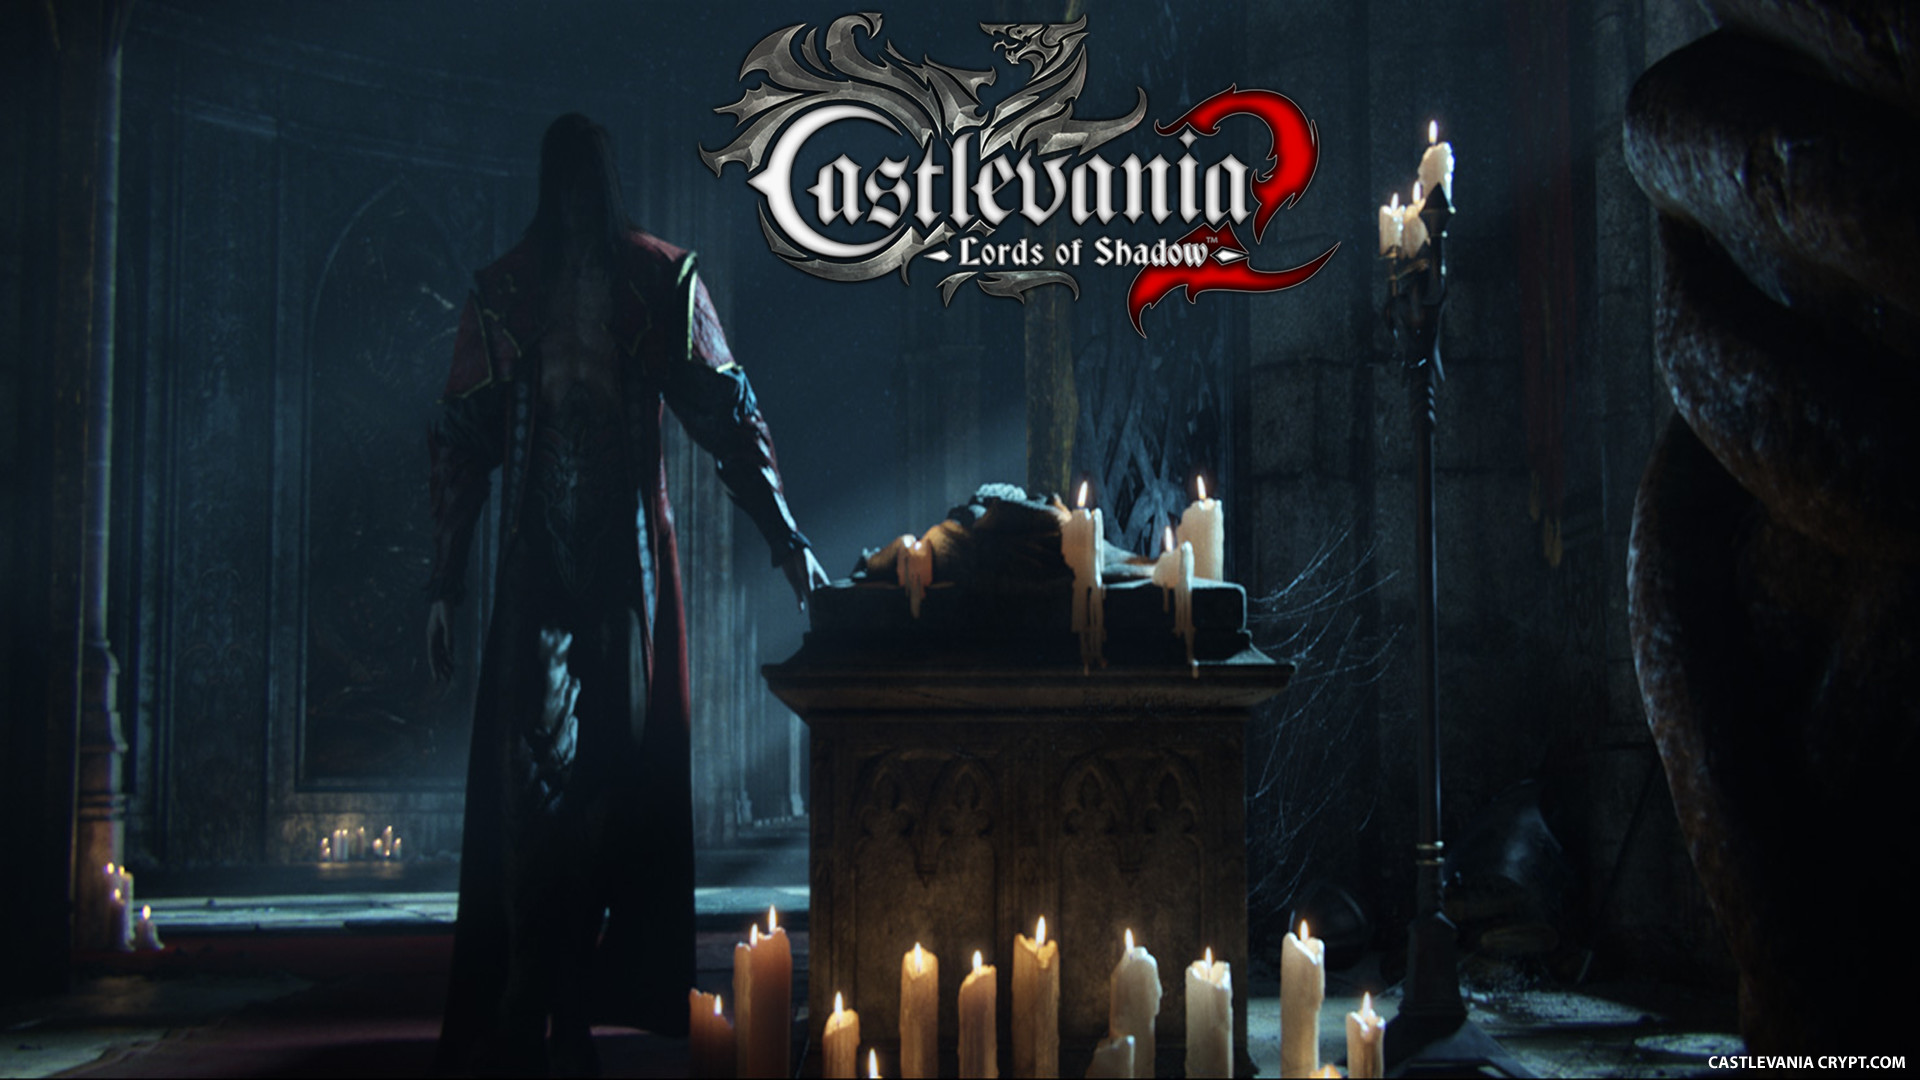 1920x1080 Castlevania: Lords of Shadow 2 Wallpaper